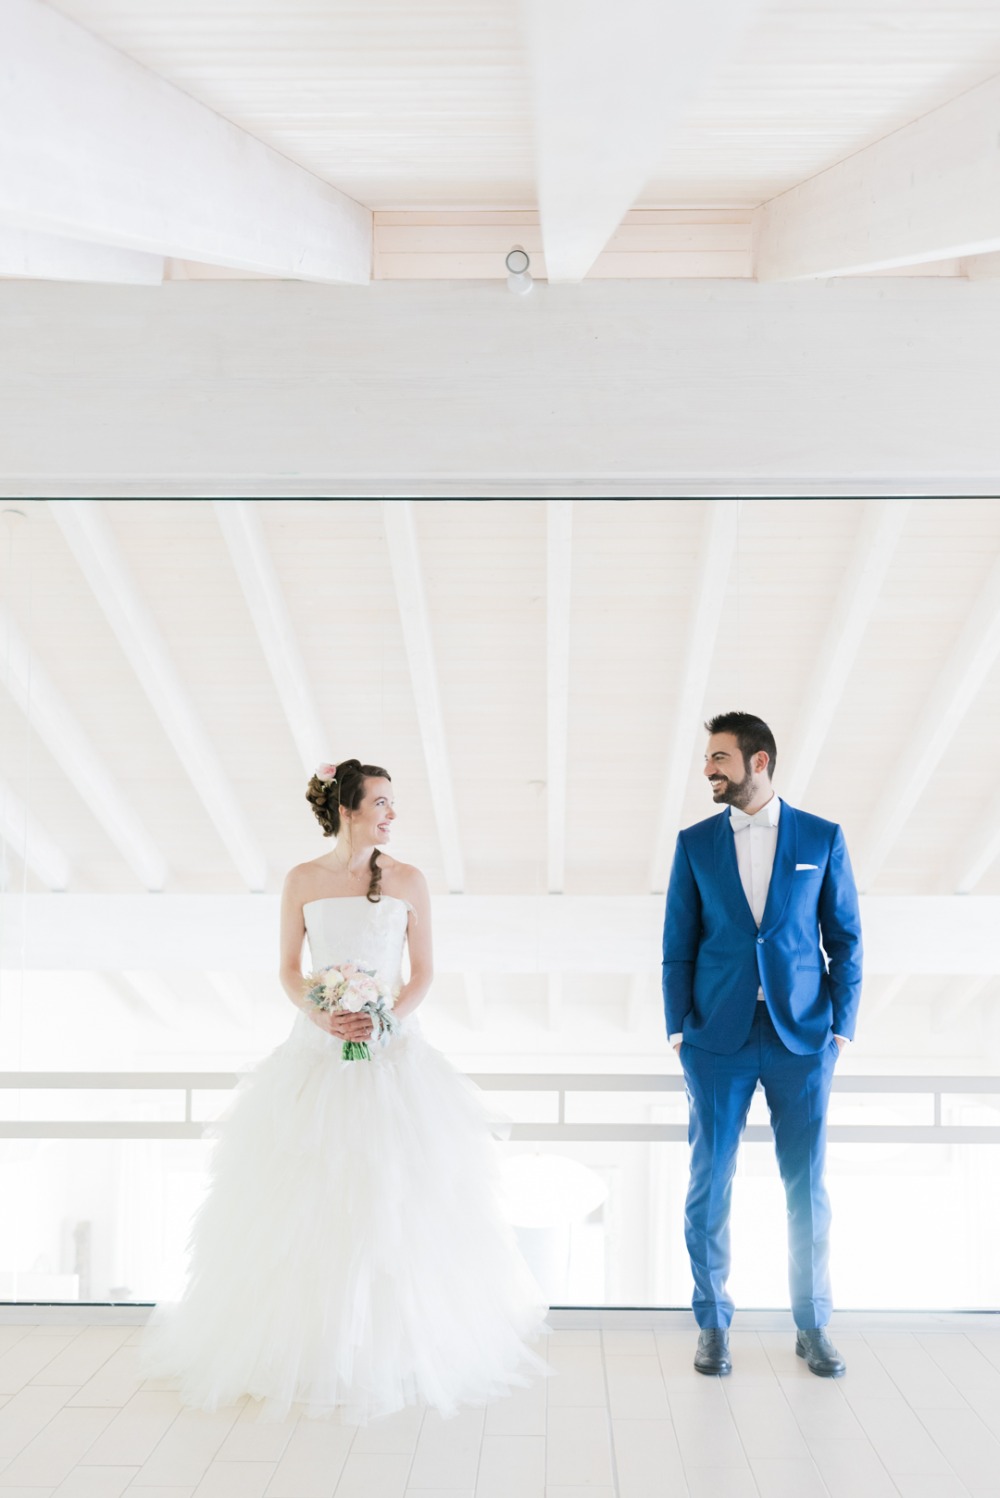 royal blue groom suit and classic bride in wedding gown